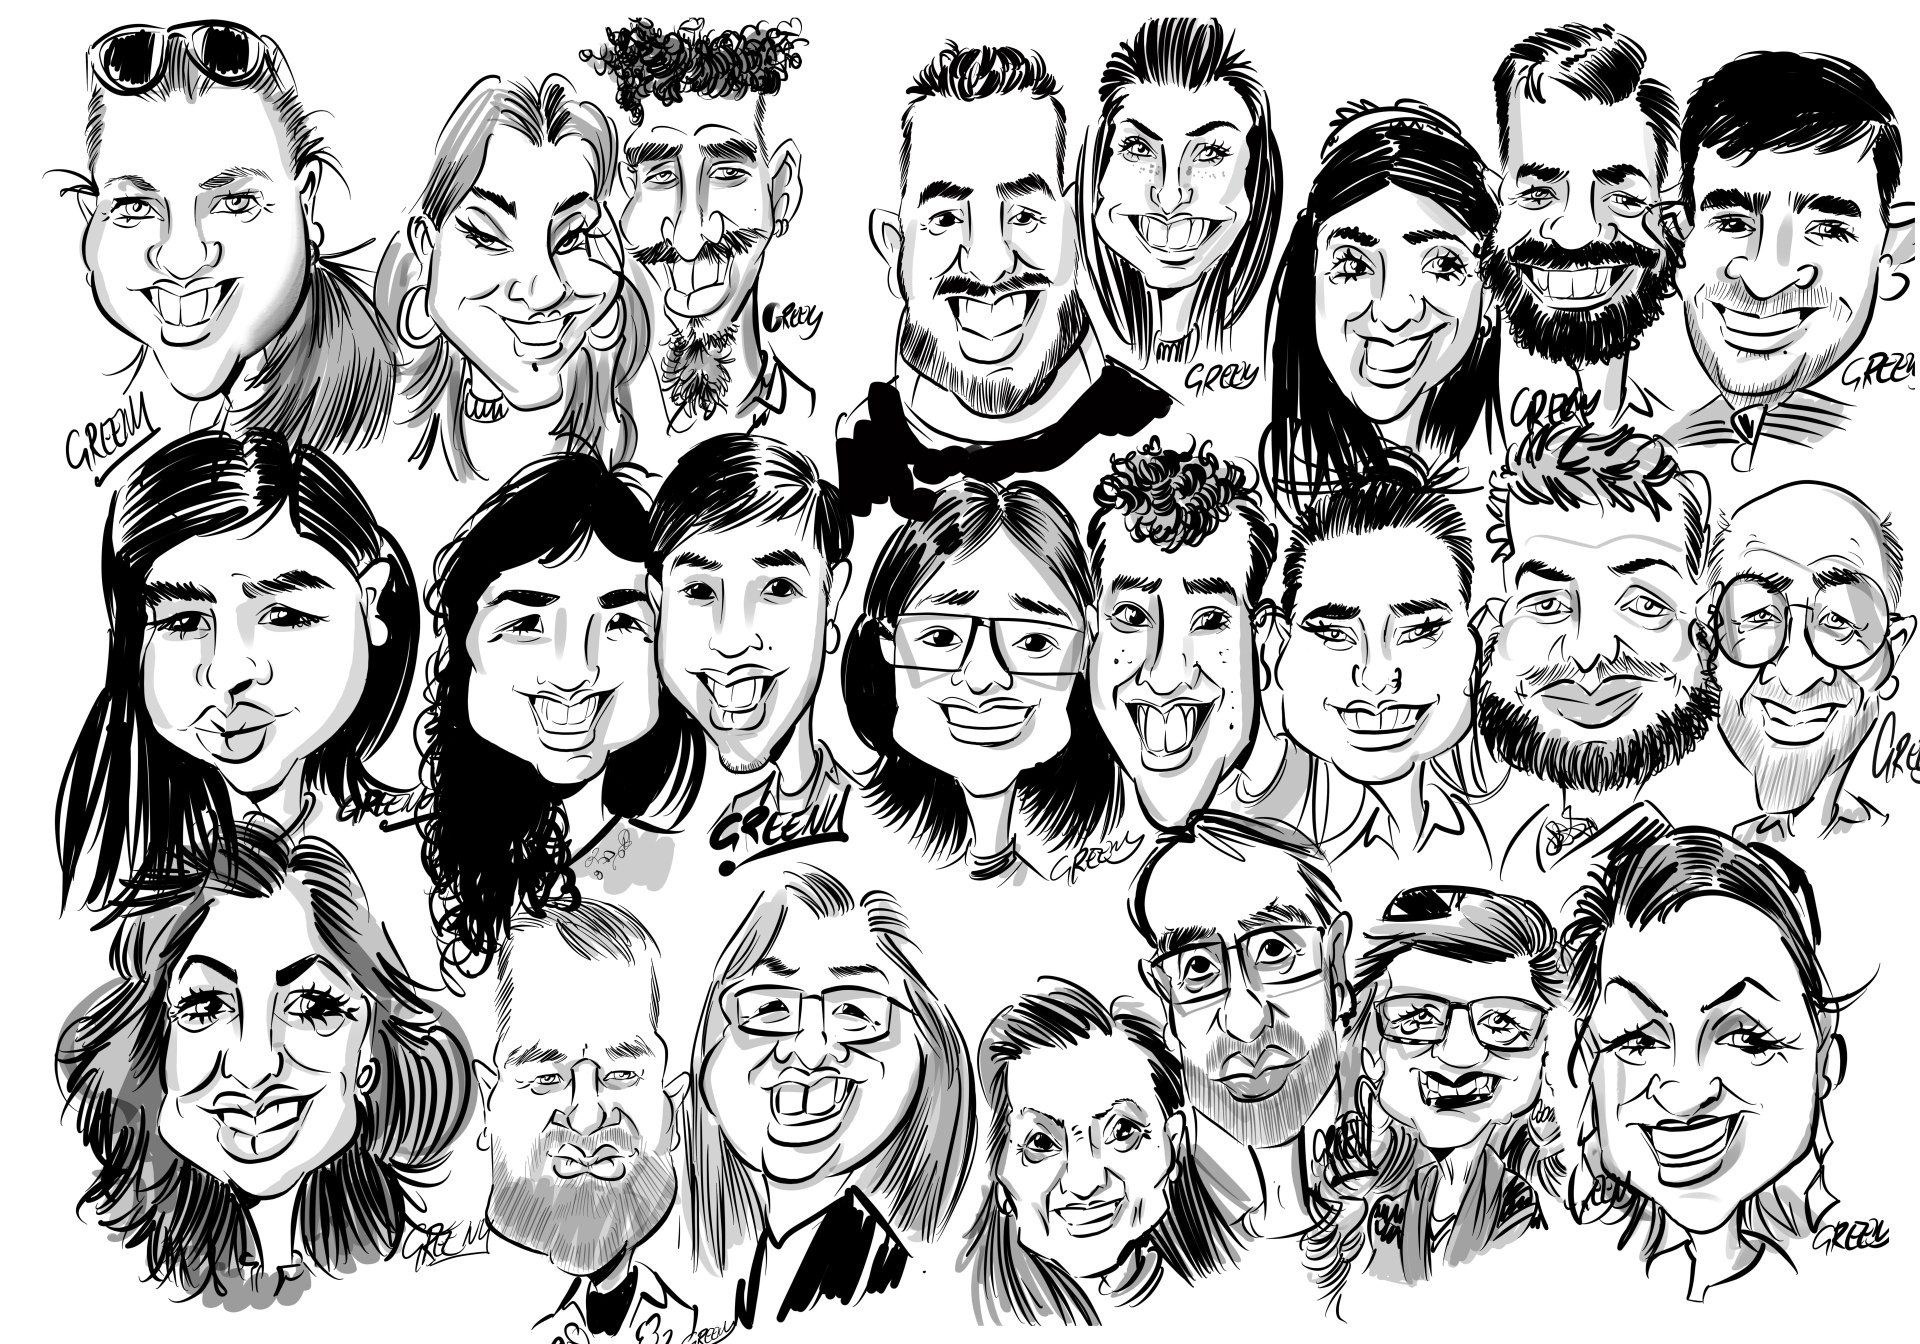 Digital live black and white caricatures on the ipad printed by david Gree